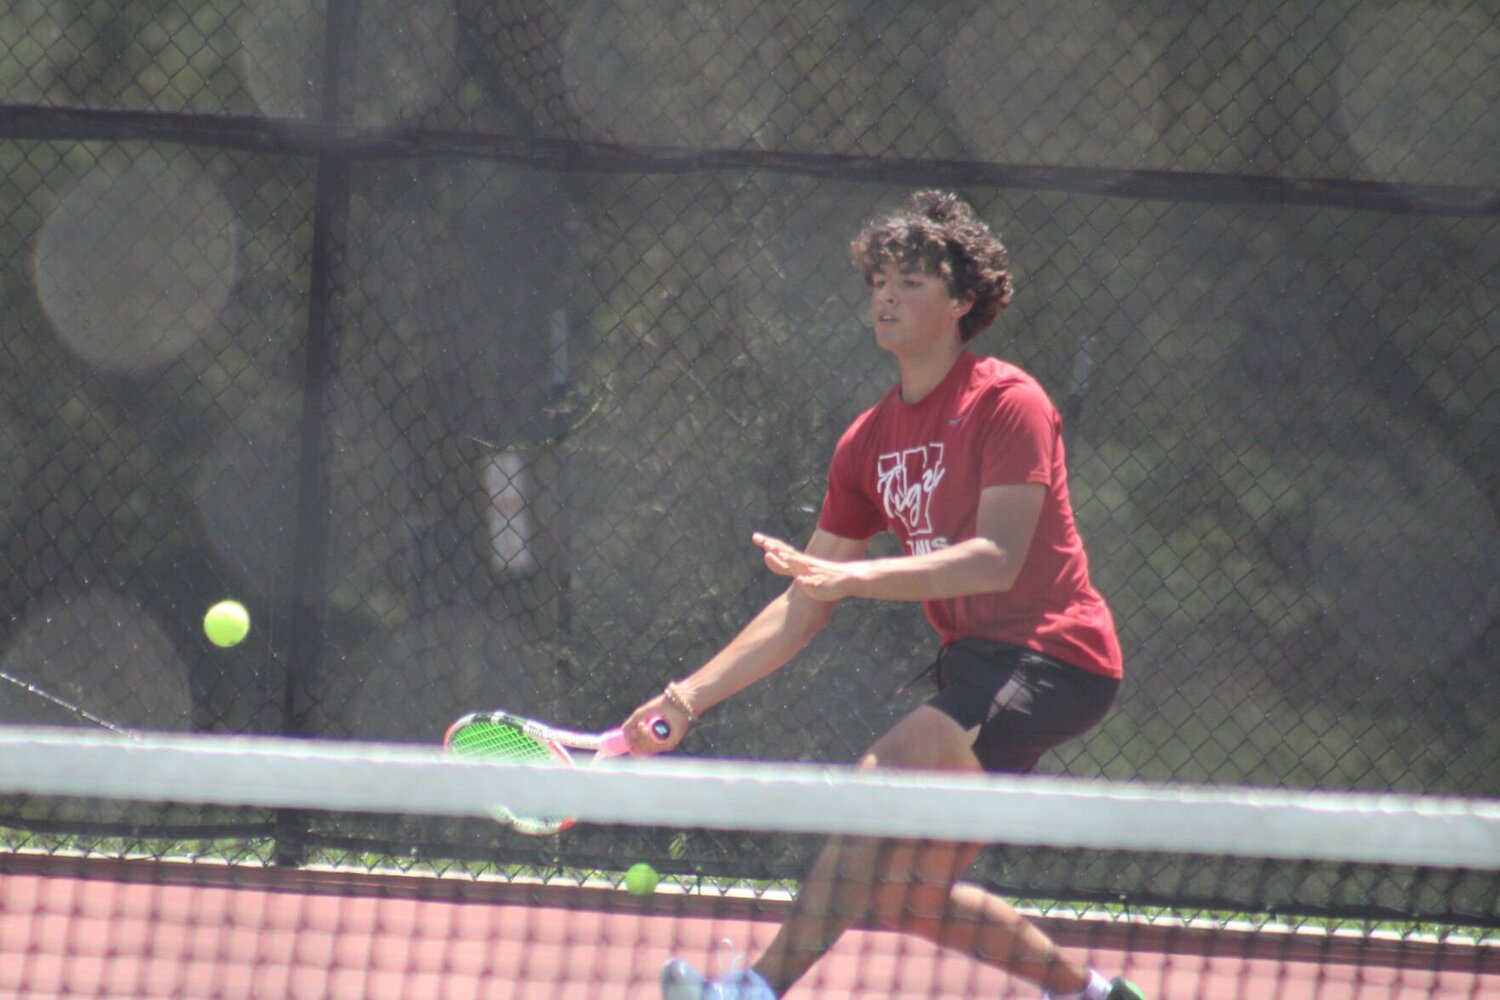 Warrensburg sophomore Calvin Werner attacks the ball against Webb City during the Class 2 District 7 semifinal round Tuesday, May 7, at the Warrensburg Activities Complex.